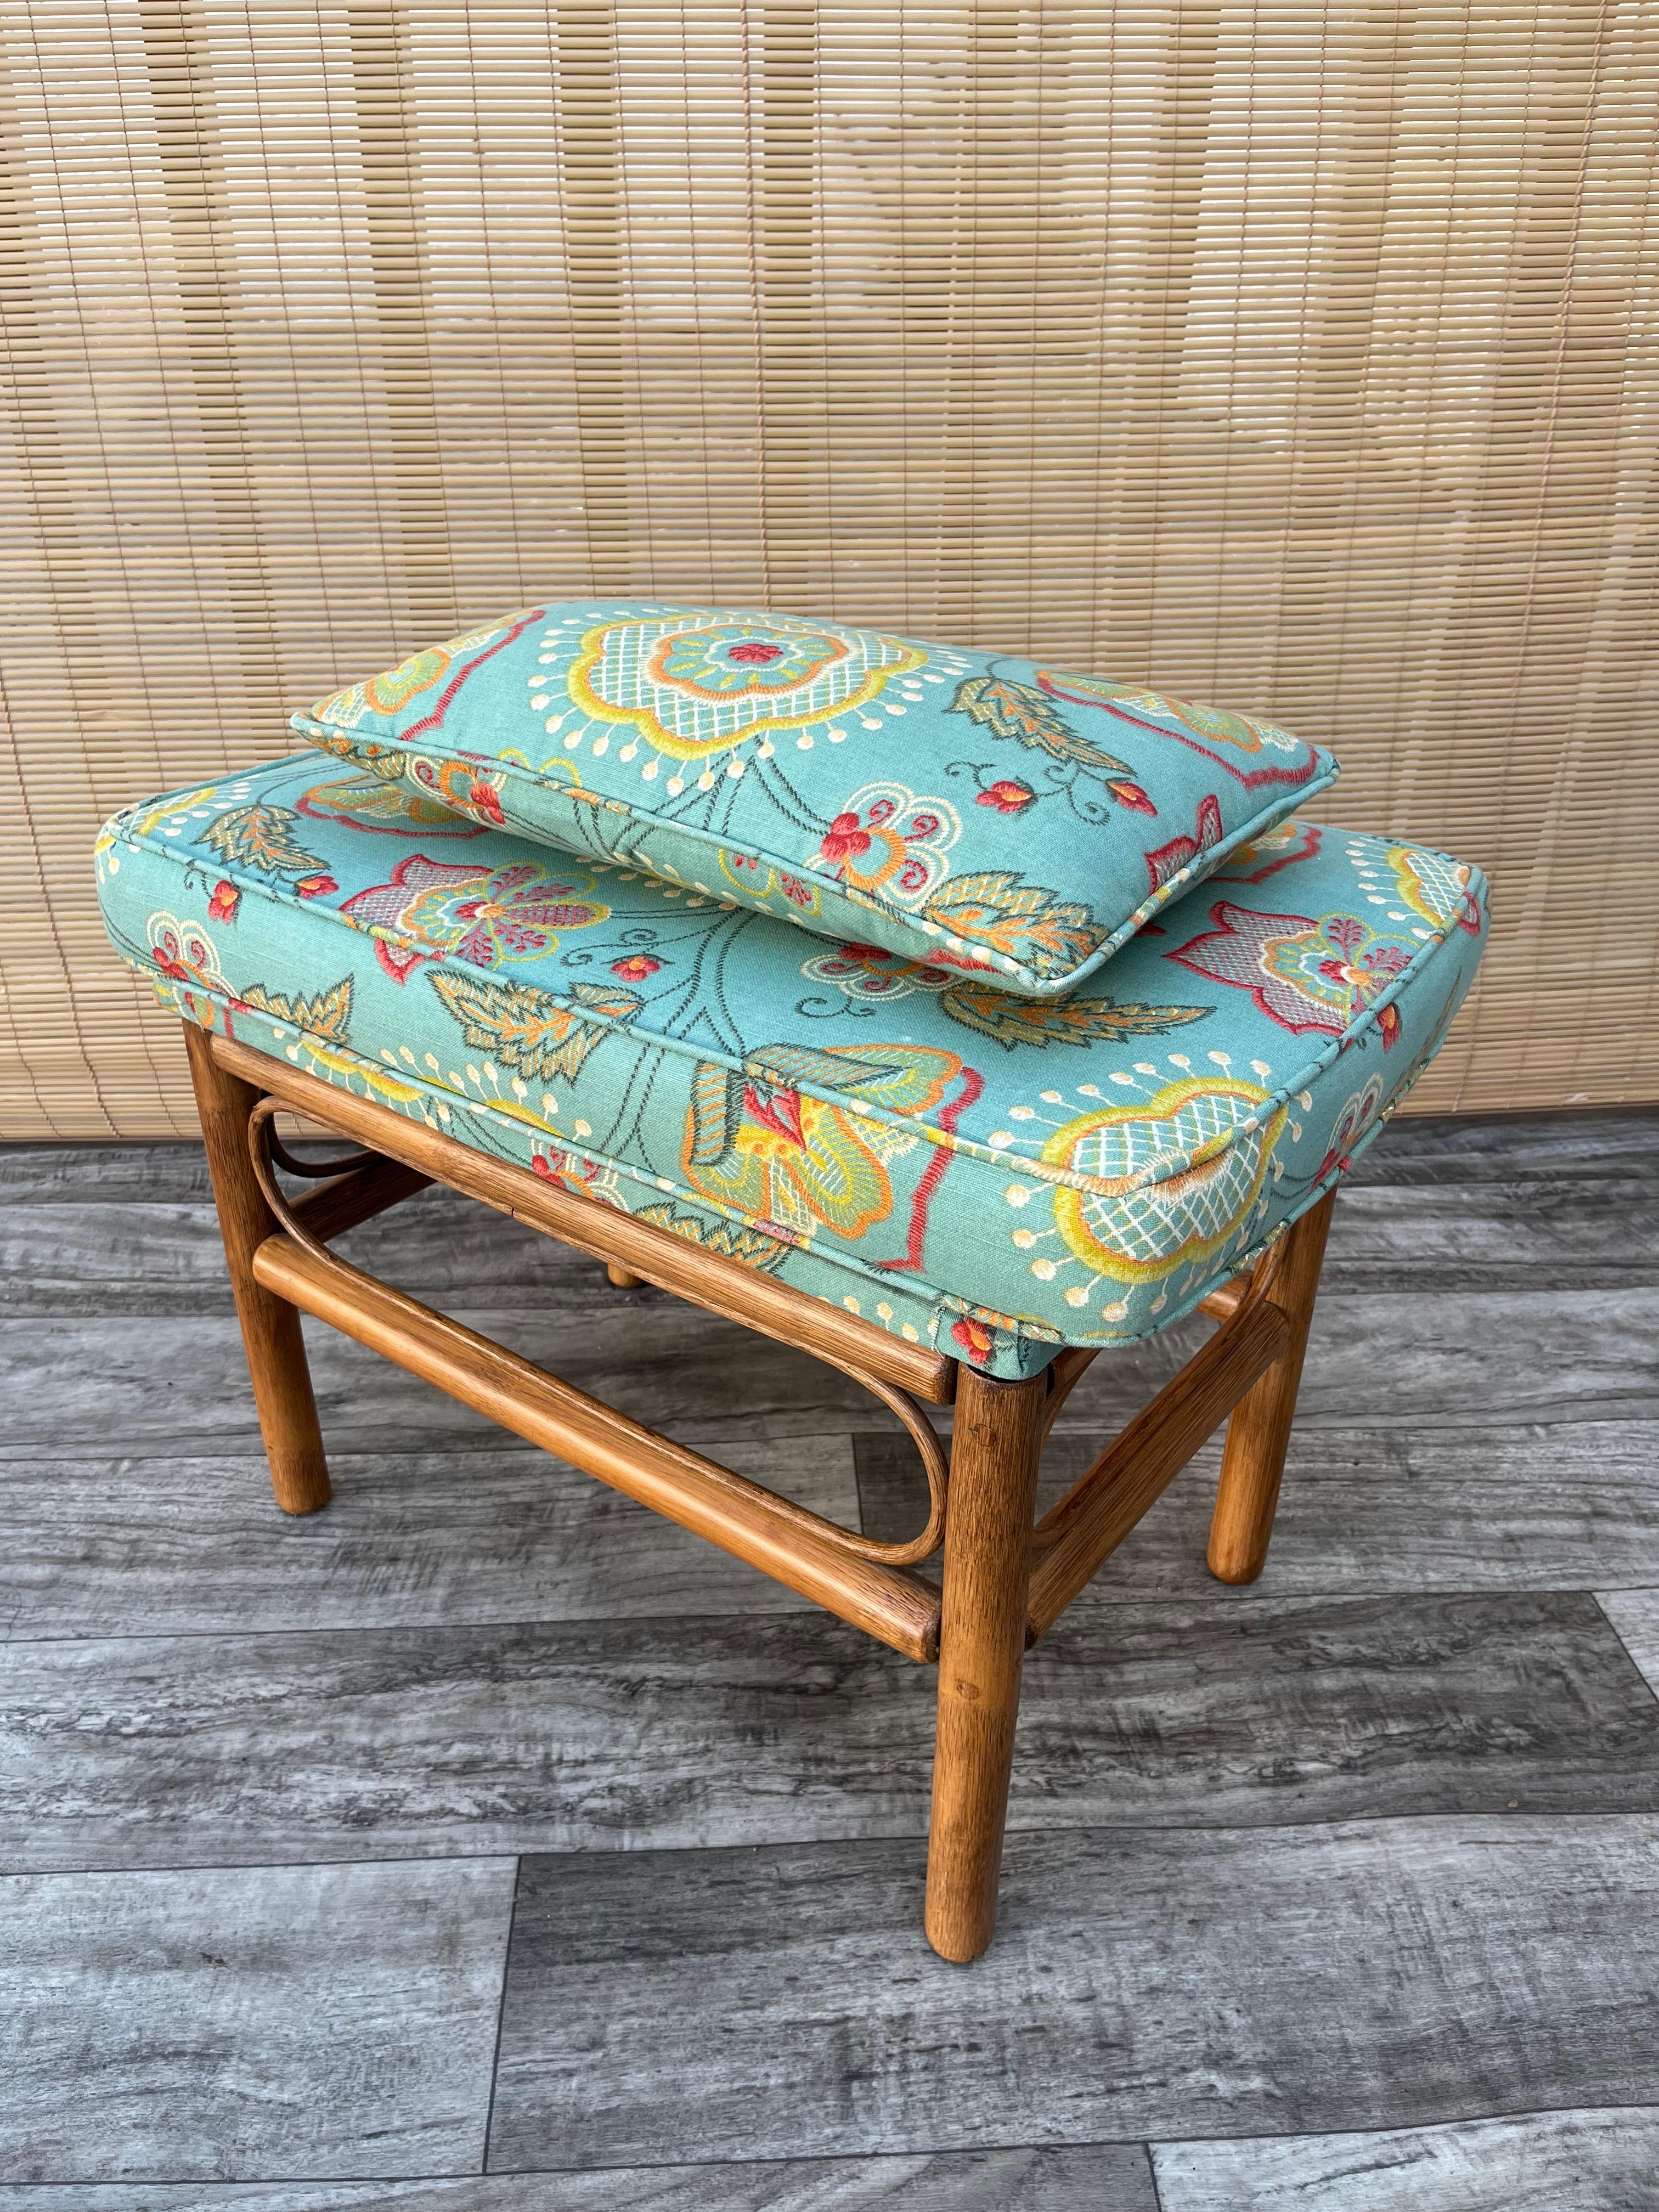 Vintage Coastal Style Boho Chic Rattan Ottoman / Bench. Circa 1960s
Features an ornate rattan frame, a removable upholstered cushion, and a matching decorative pillow.
An excellent accent piece for any room decoration. 
In excellent condition